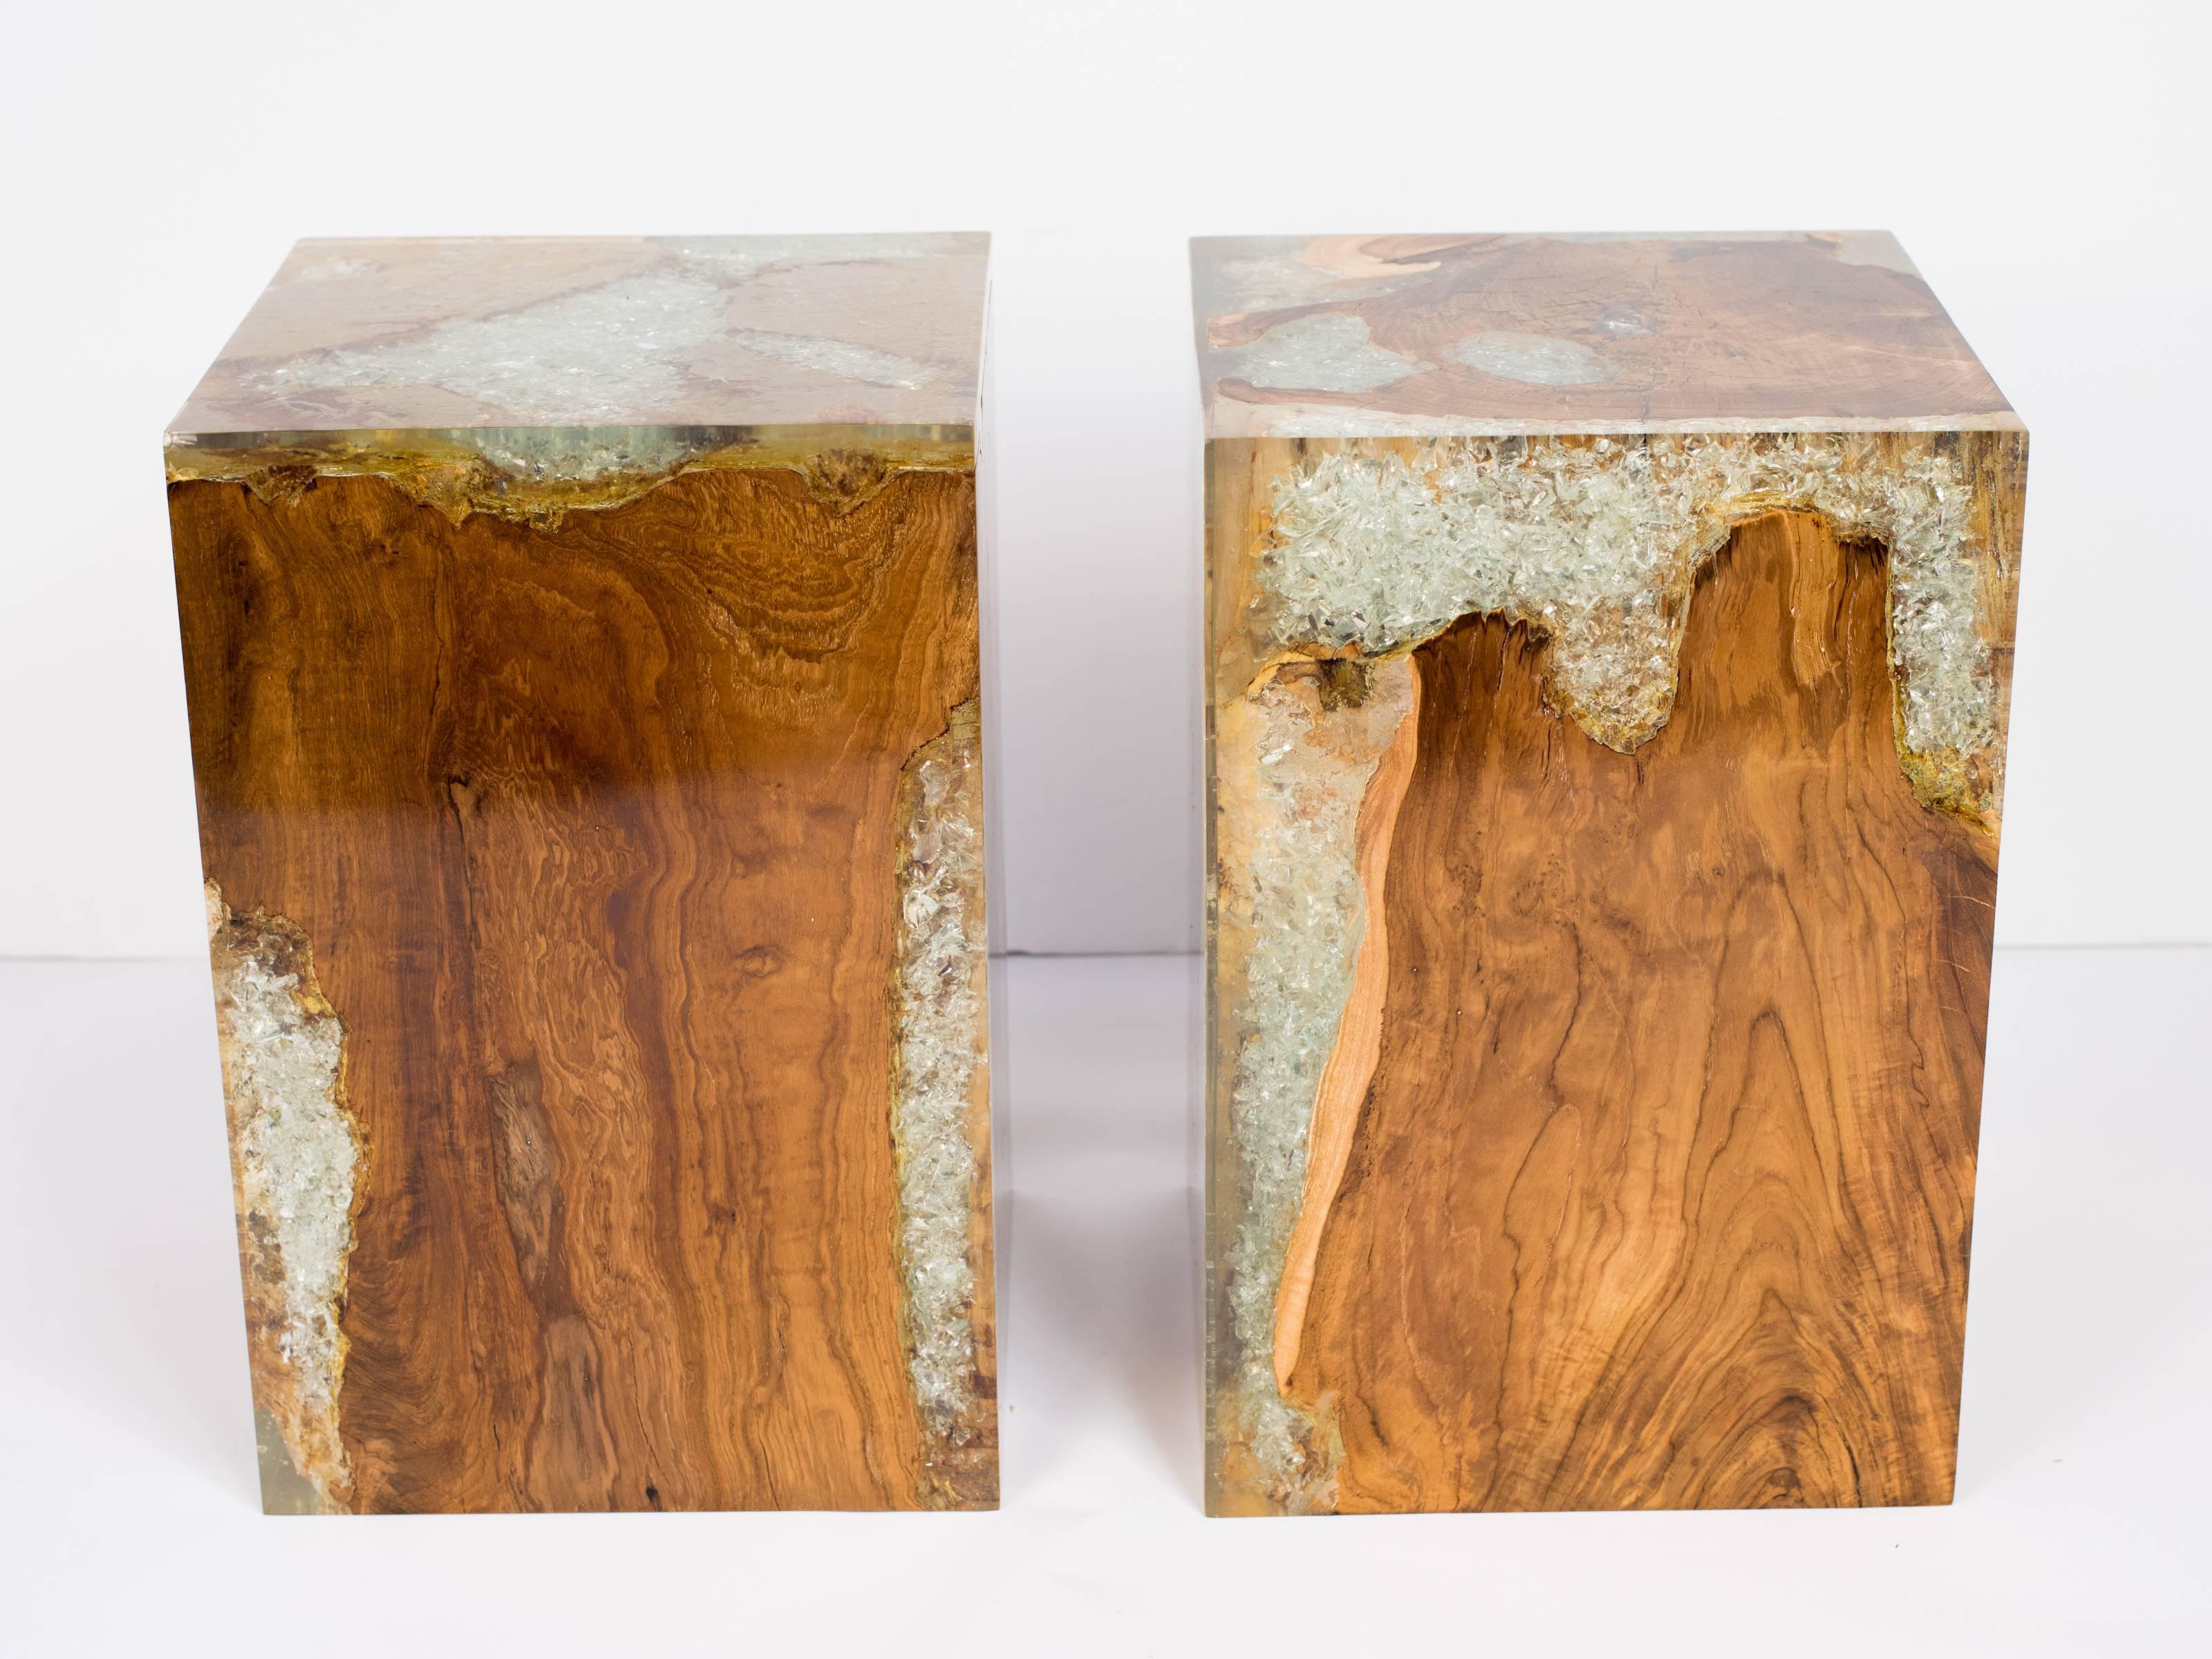 Pair of Organic Modern side tables in natural and bleached reclaimed teak root wood infused with cracked resin. Polished finish with unique wood variations on all sides. Handcrafted in Indonesia for multi-purpose use. Some variation in colors may be